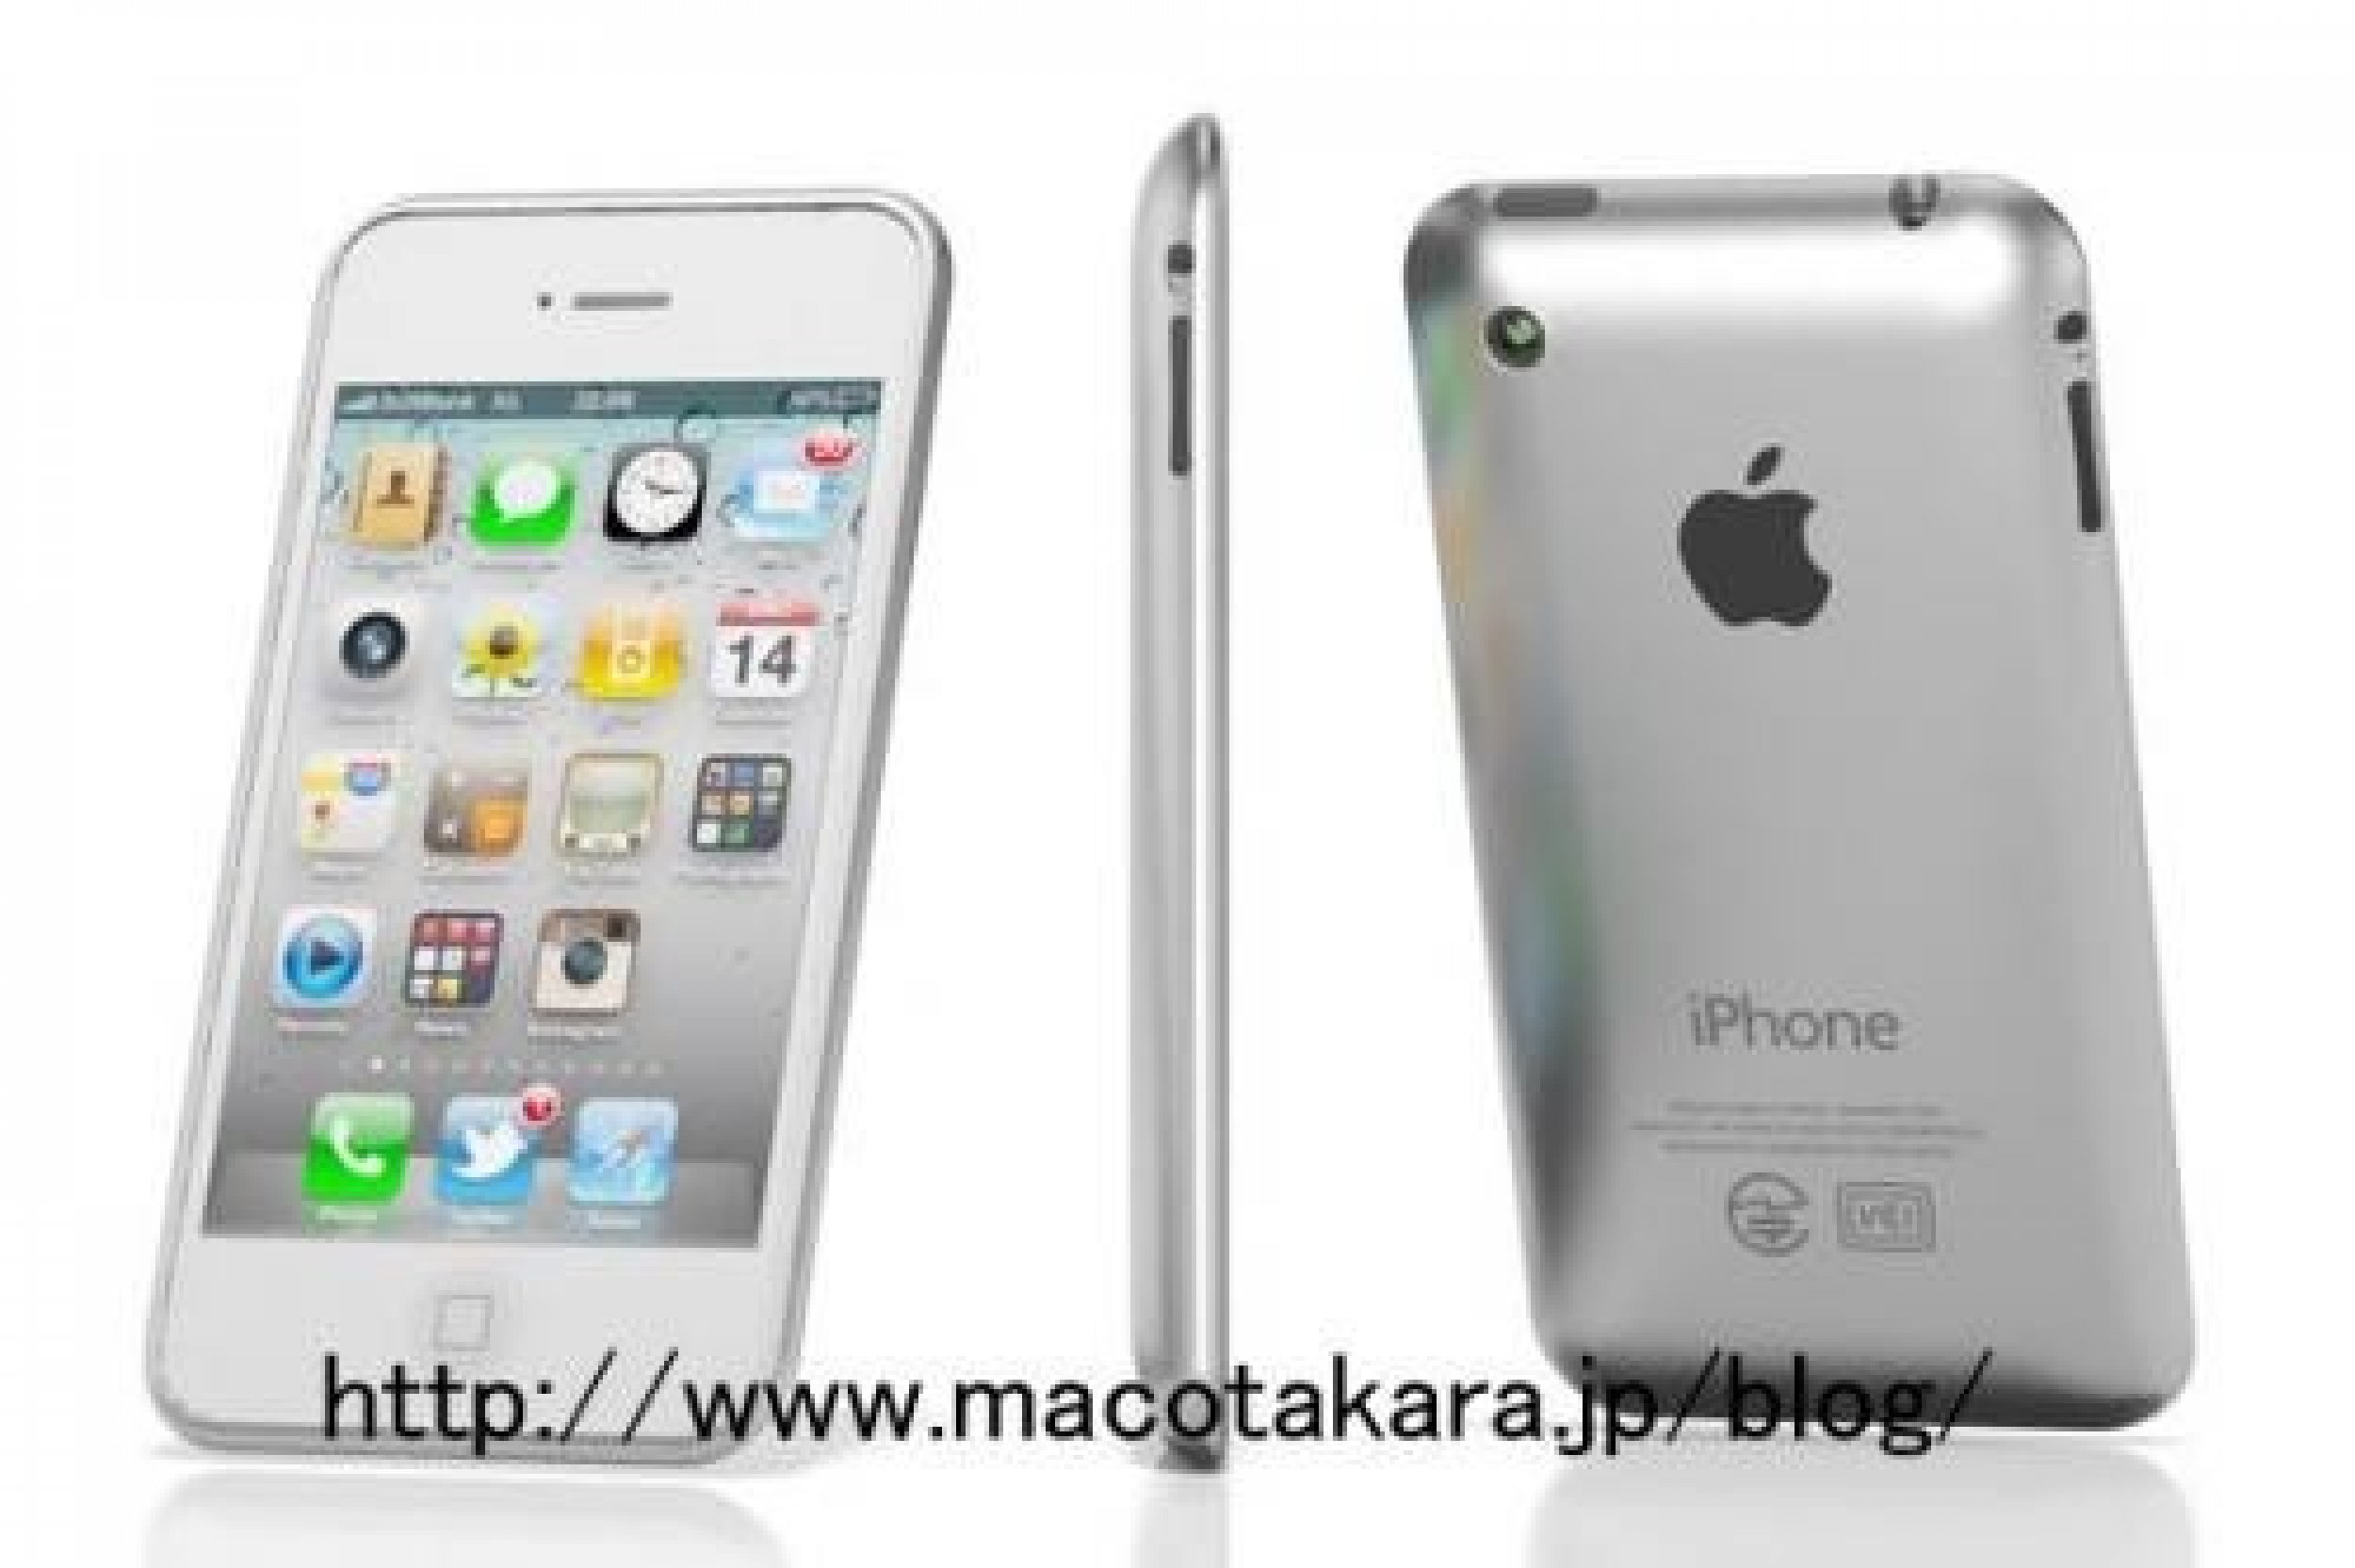 iPhone 5 Top 10 Features We Want to See in Apples Latest iPhone